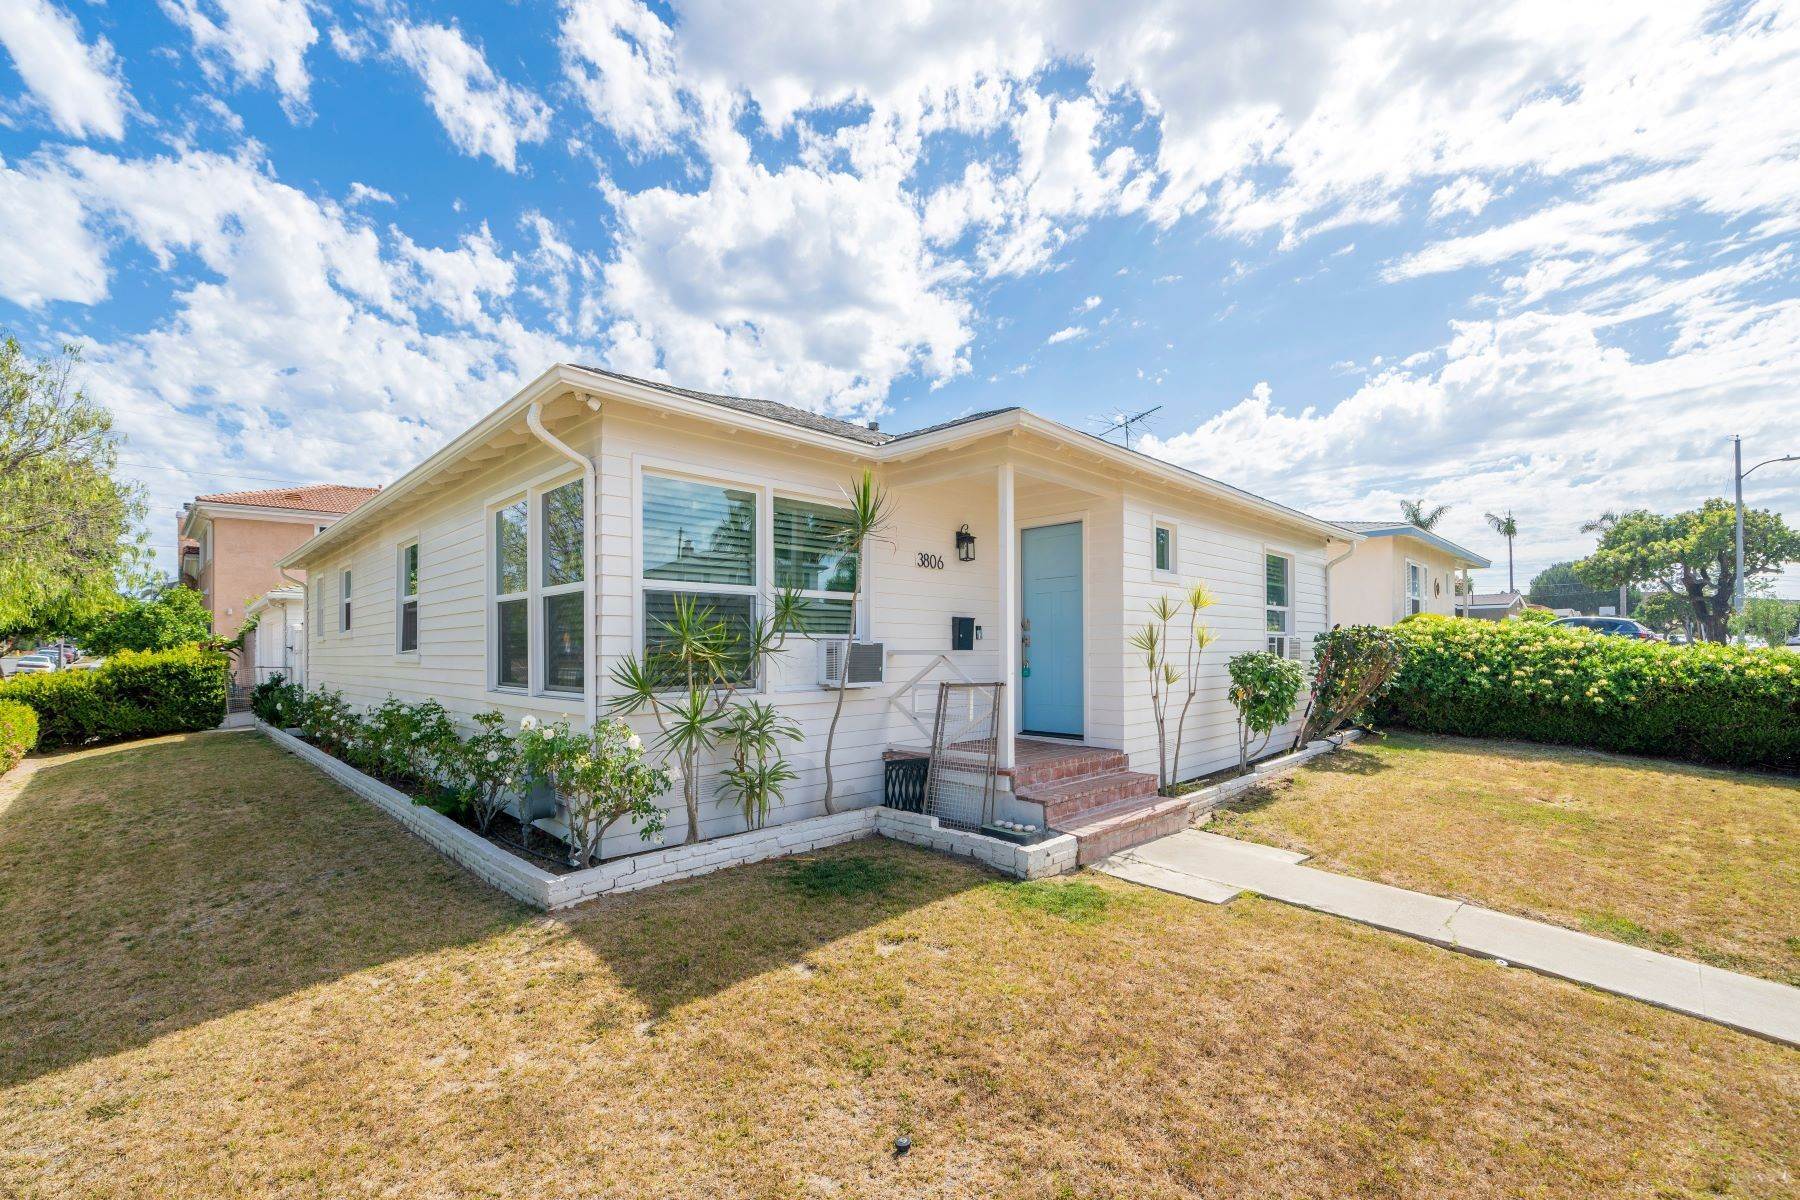 Single Family Homes for Sale at 3806 West 172nd Street, Torrance, CA 90504 3806 West 172nd Street, Torrance, CA 90504, Torrance, California 90504 United States